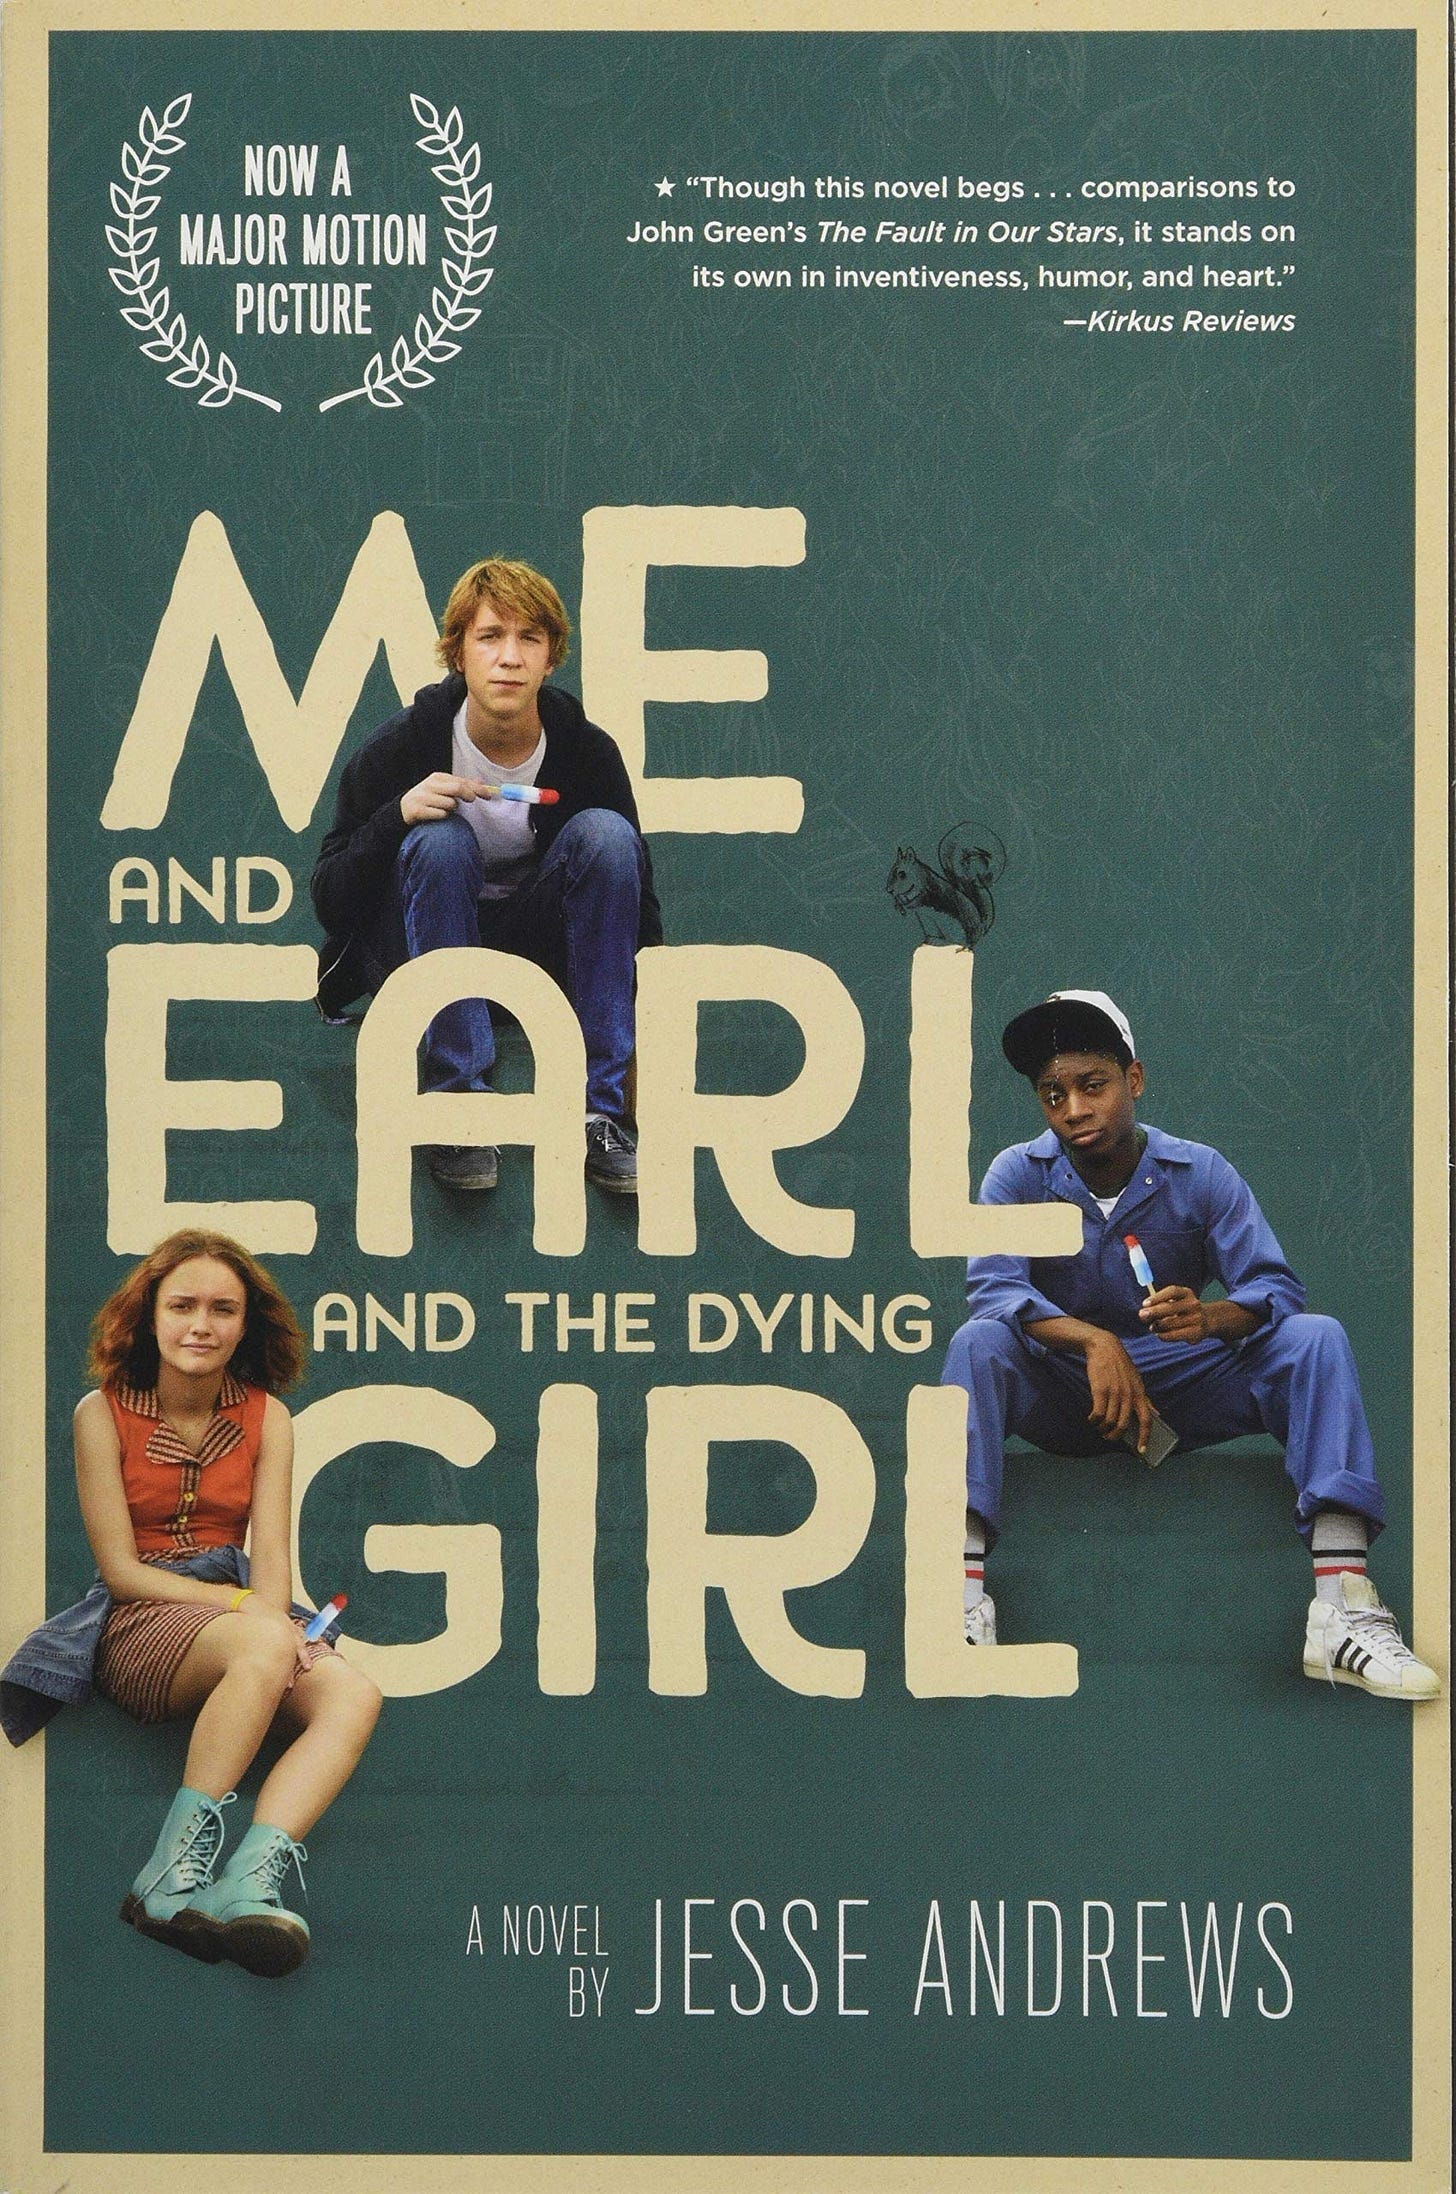 Amazon.com: Me and Earl and the Dying Girl (Movie Tie-in Edition)  (9781419719462): Andrews, Jesse: Books